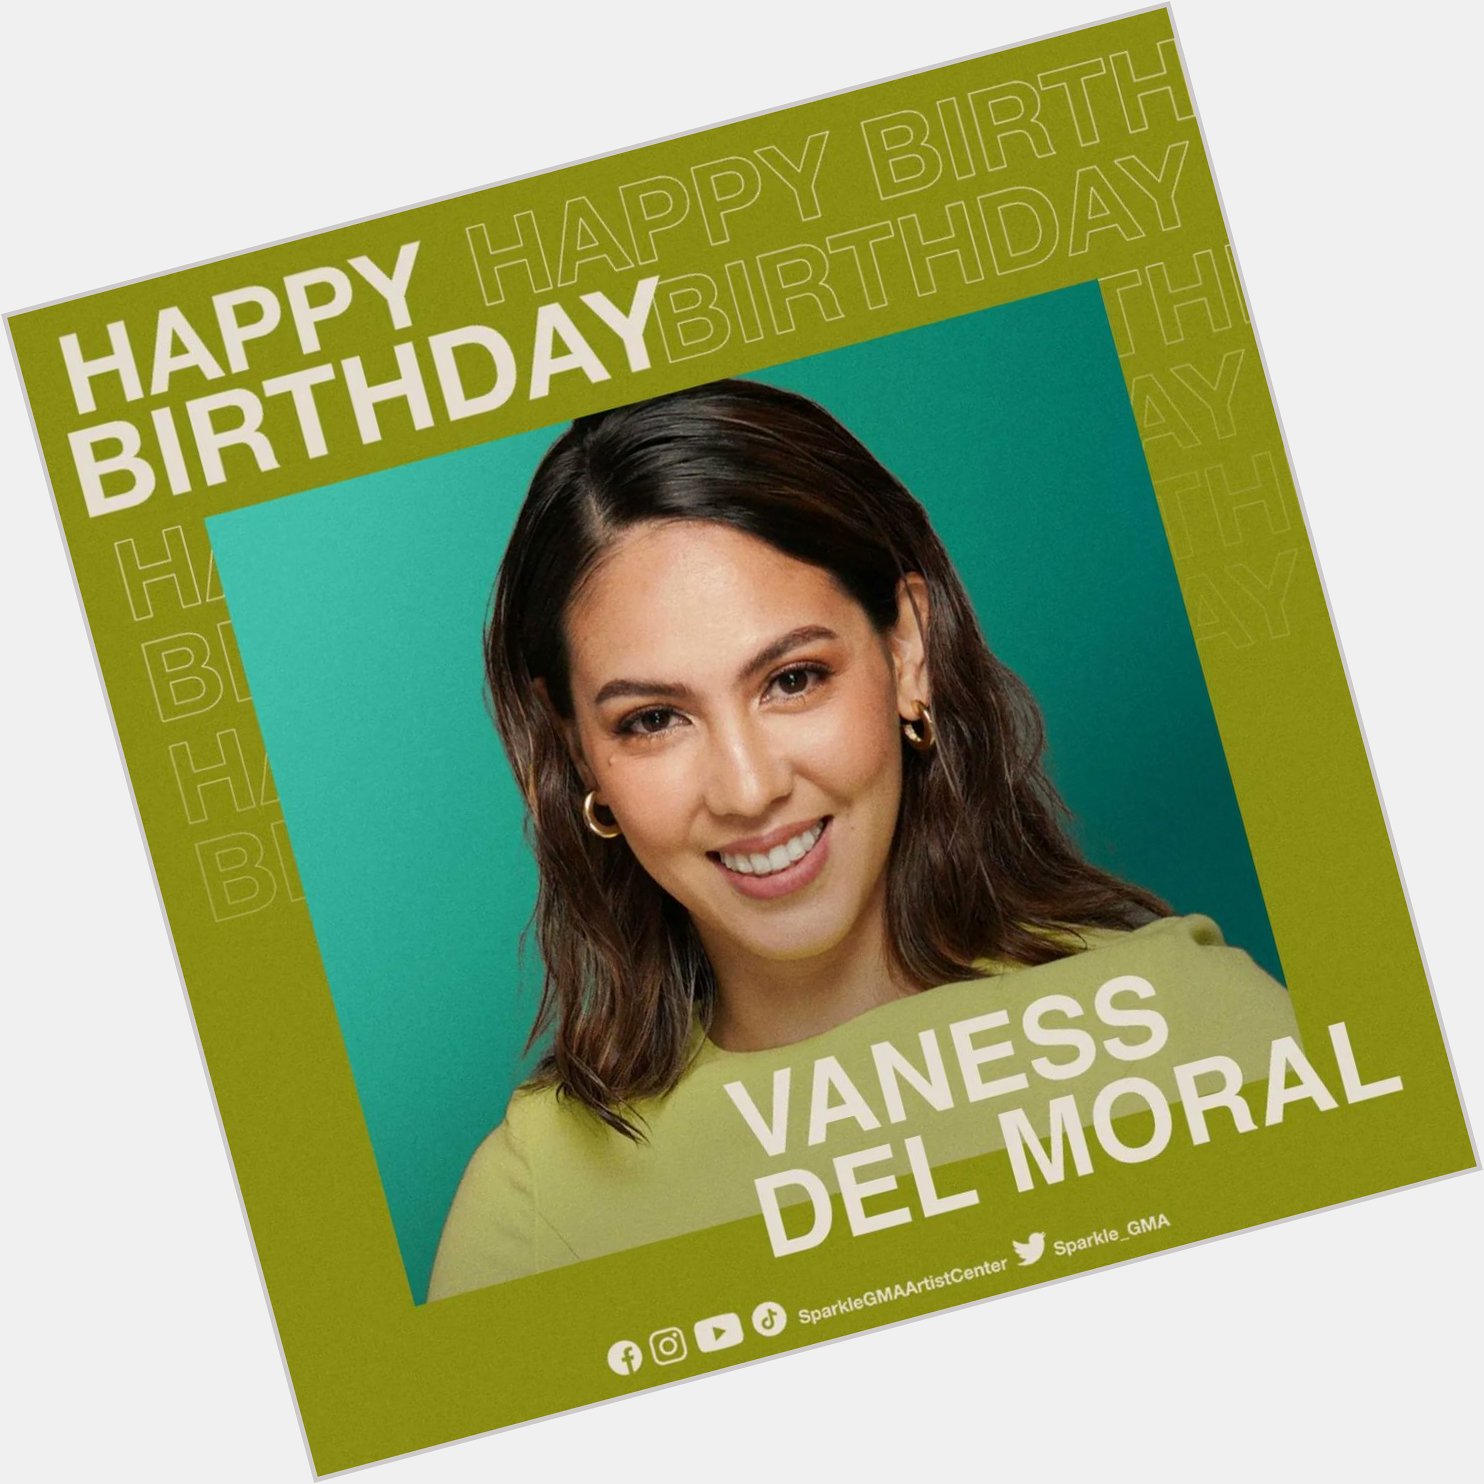 It\s Vaness Del Moral\s special day  Make sure you wish her a \Happy Birthday\ today!     